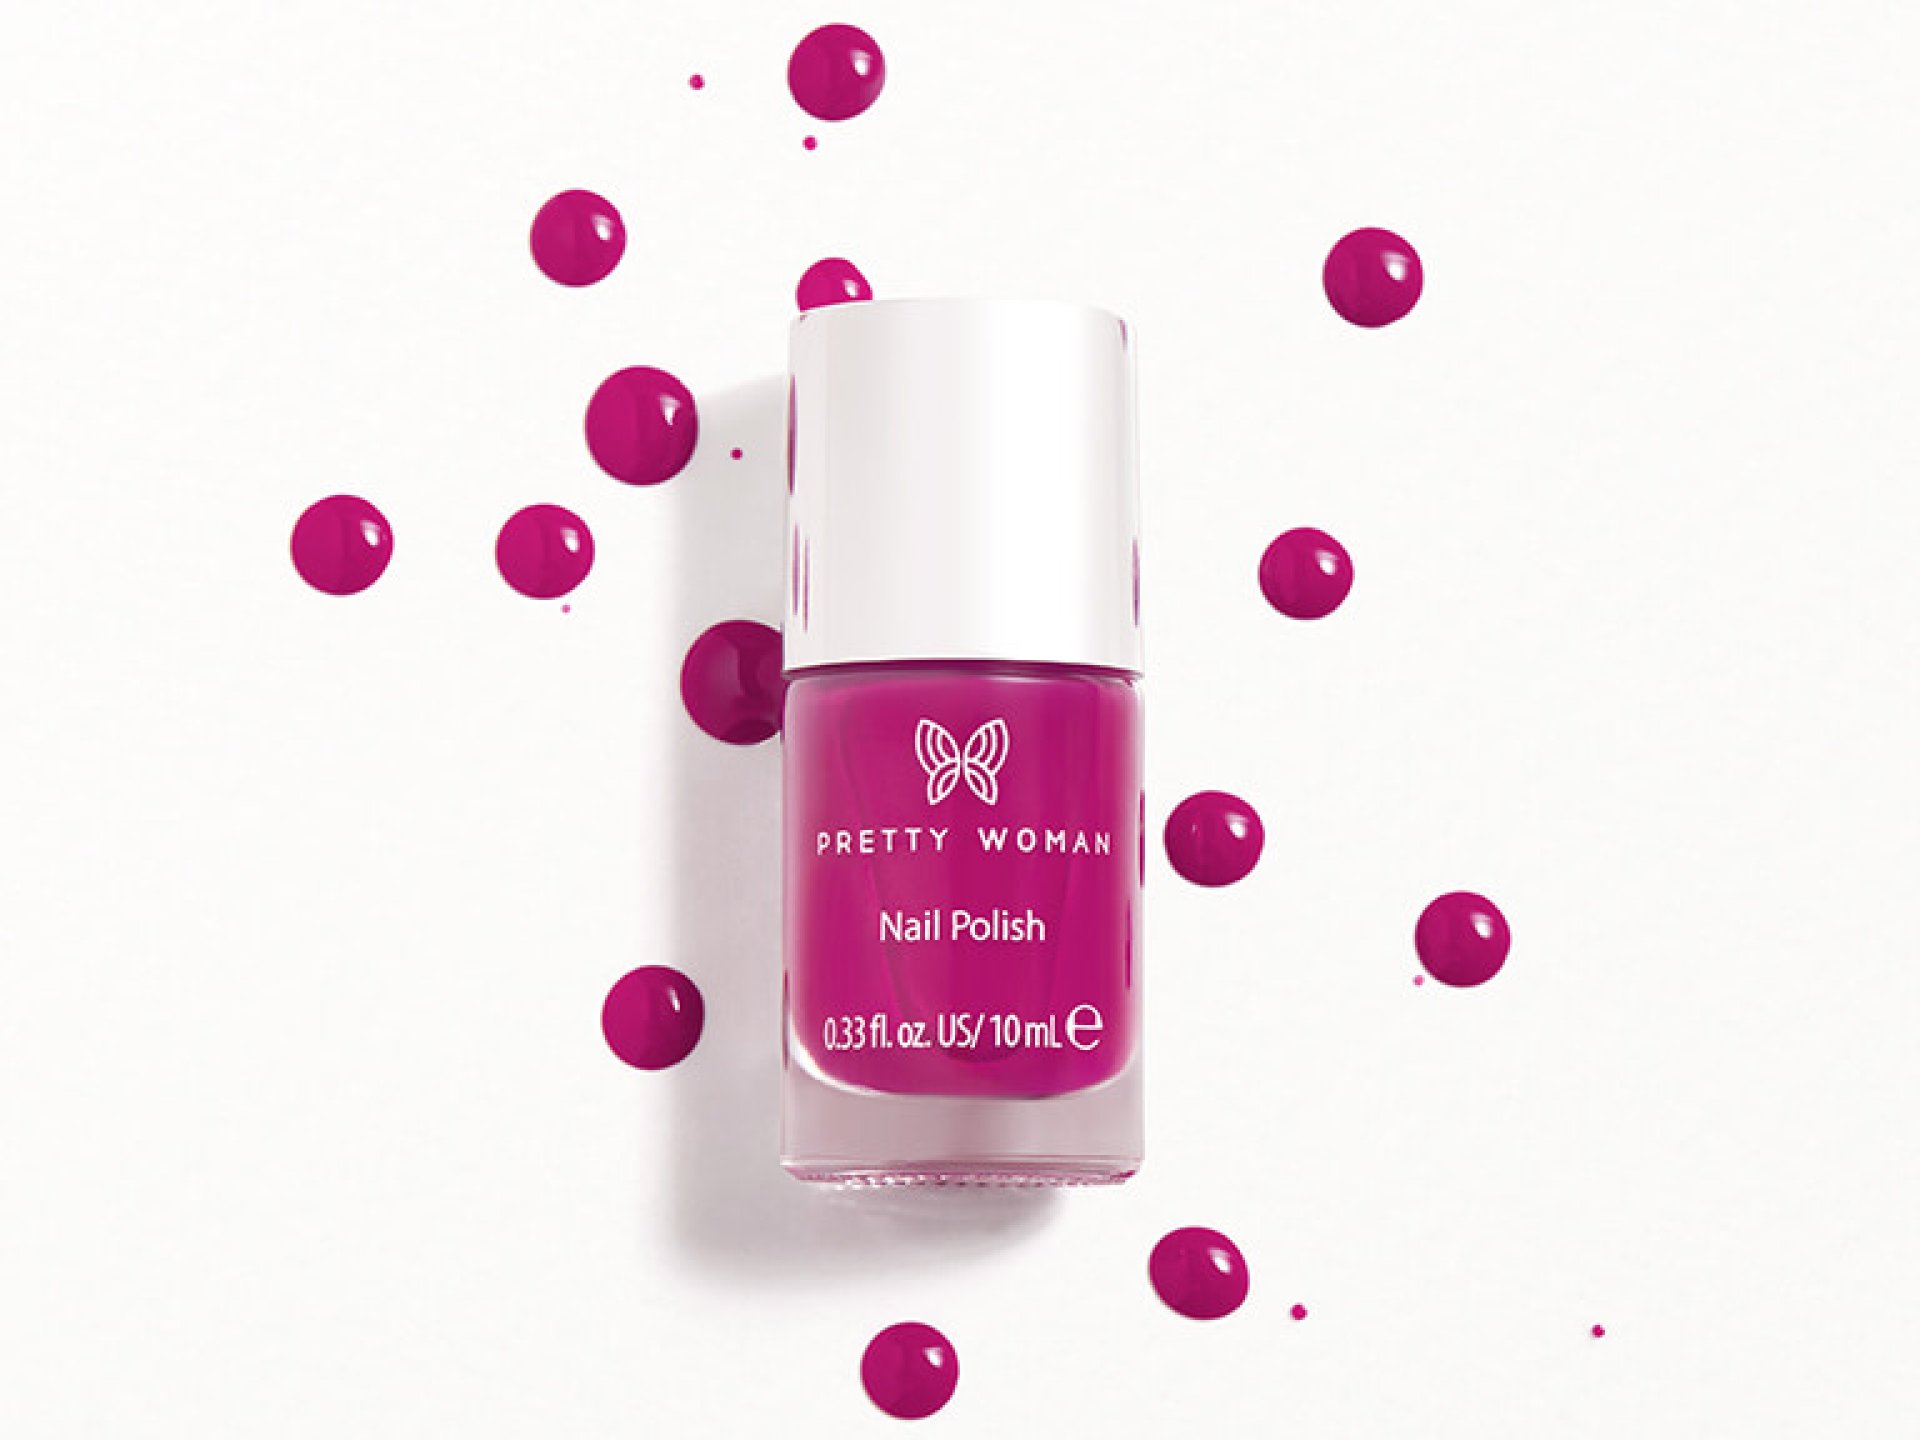 PRETTY WOMAN Nail Polish in Orchid Bloom